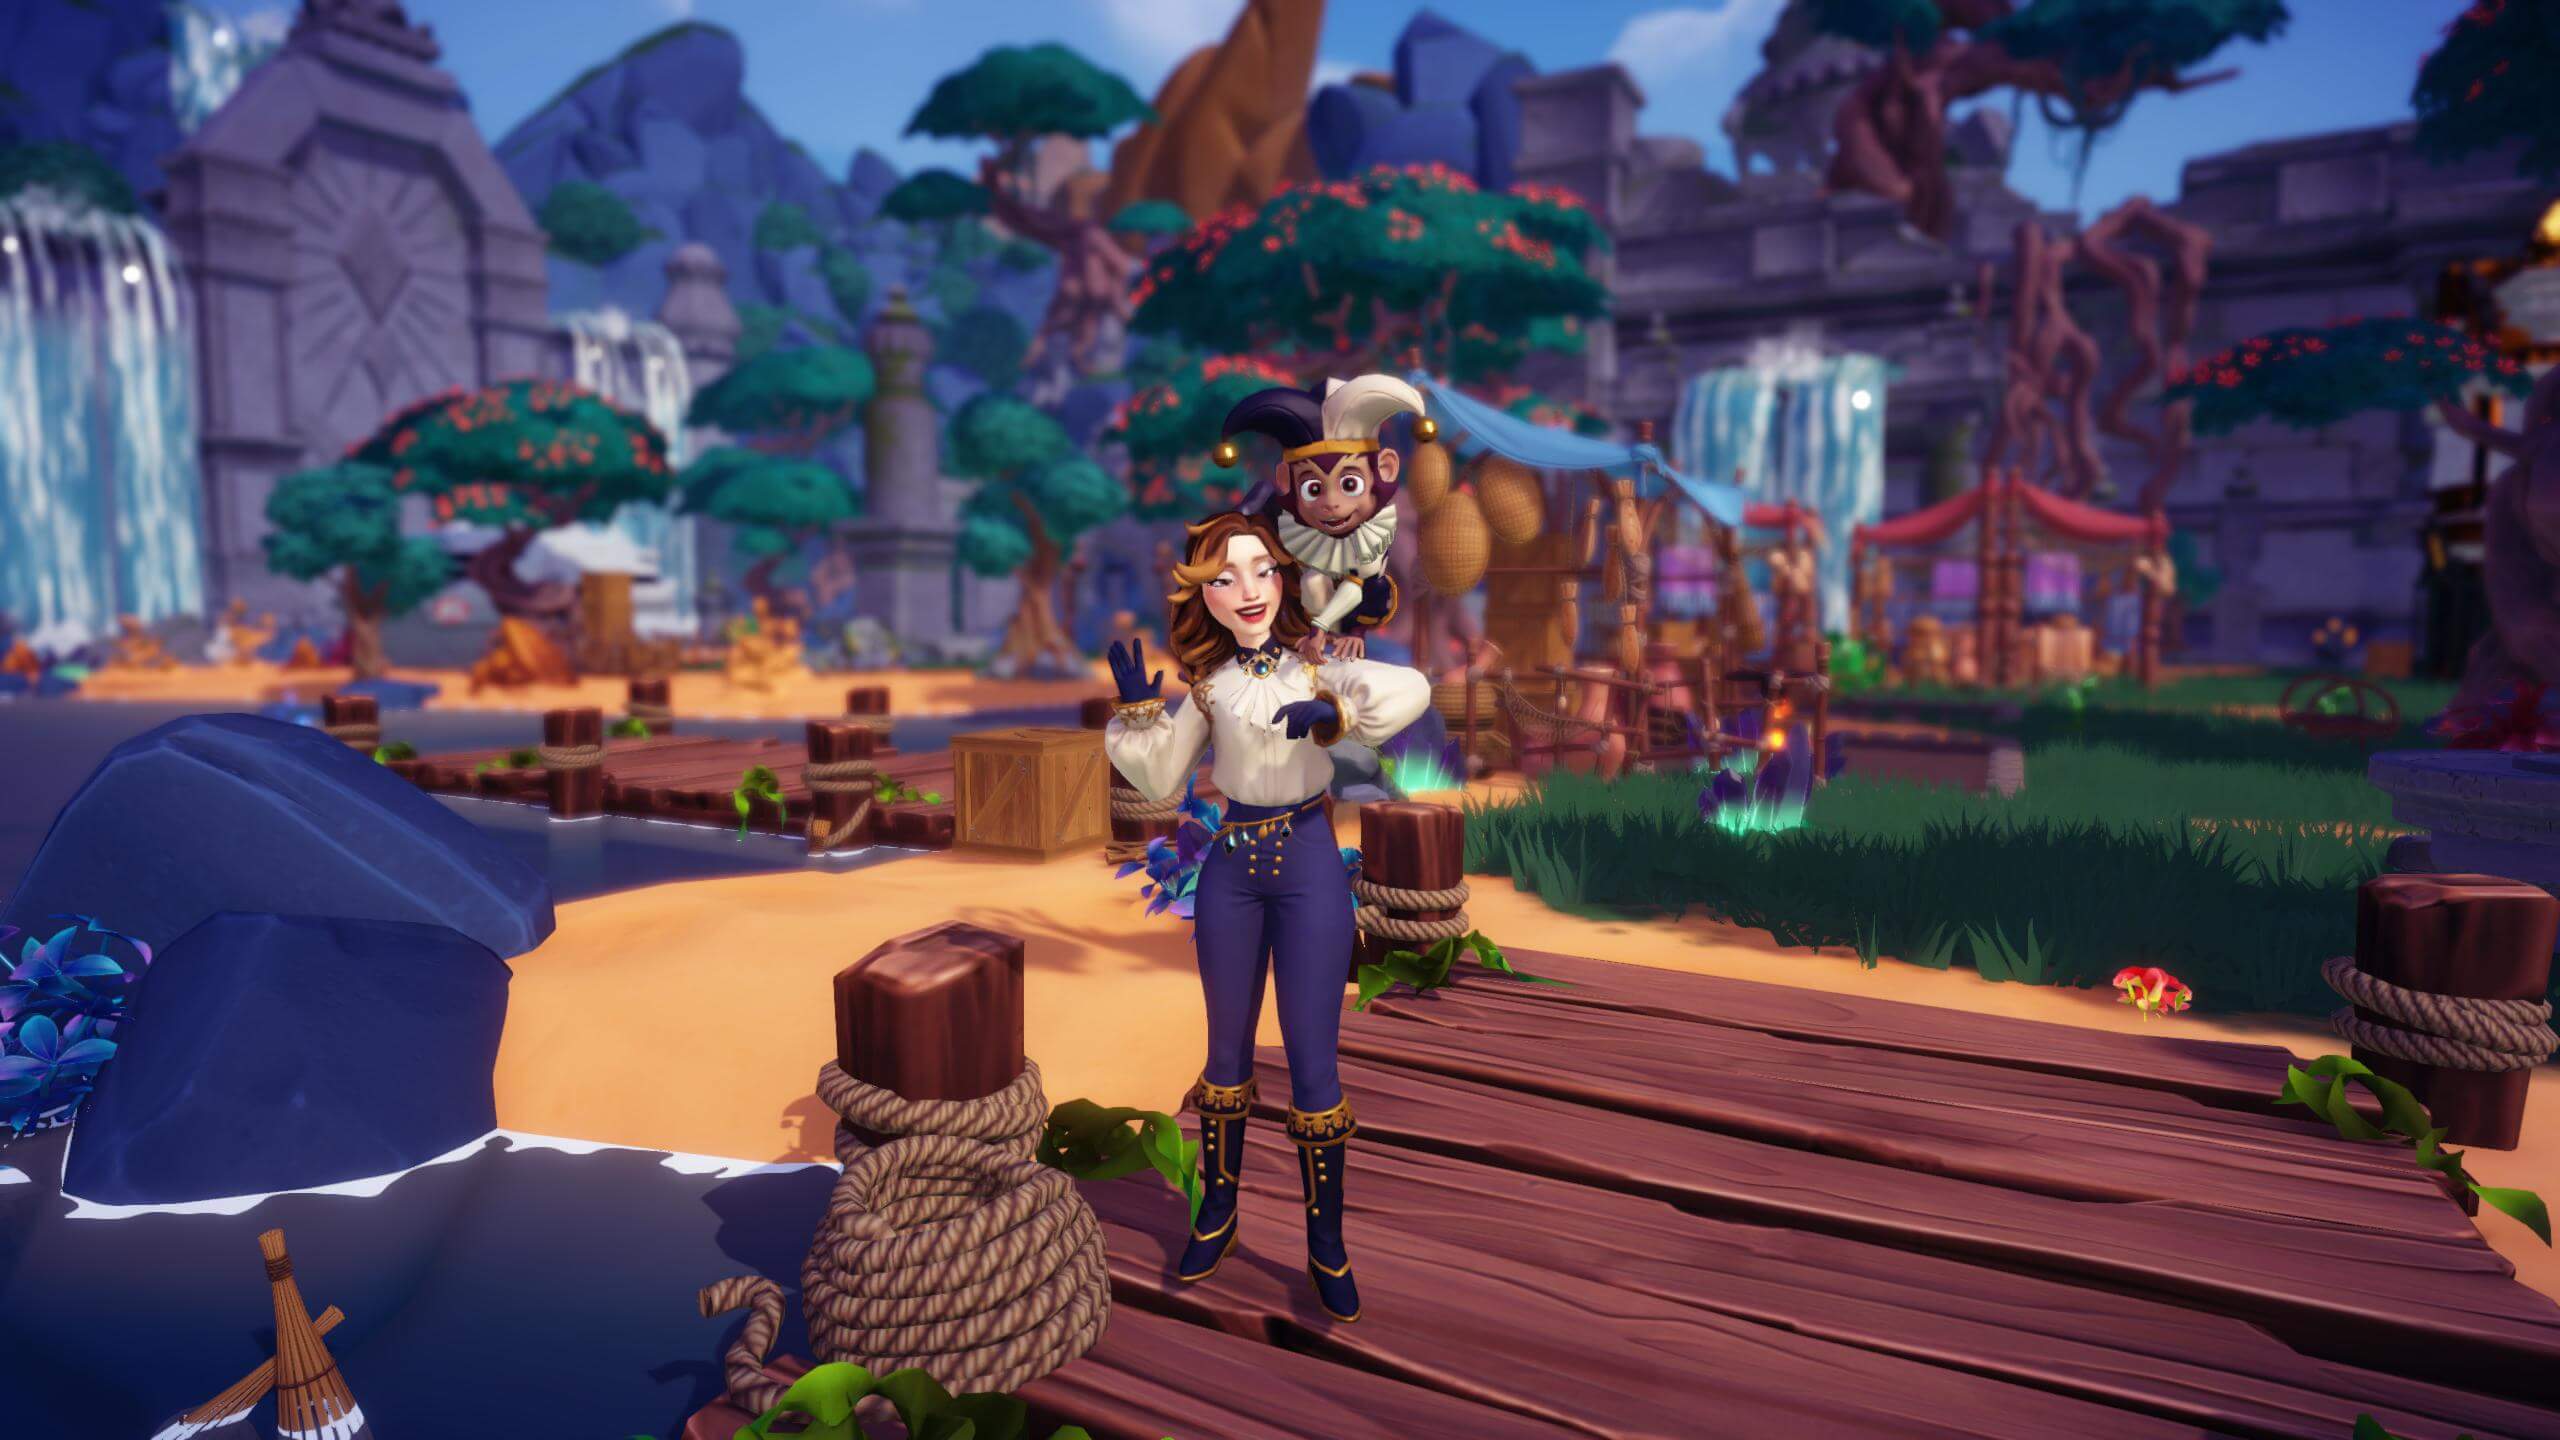 The playable character in Dreamlight Valley A Rift in Time. You can see the pet companion sitting on her shoulders dressed up a jester. The character stands in the entrance of Eternity Isle, where you can see water falls, market huts and greenery